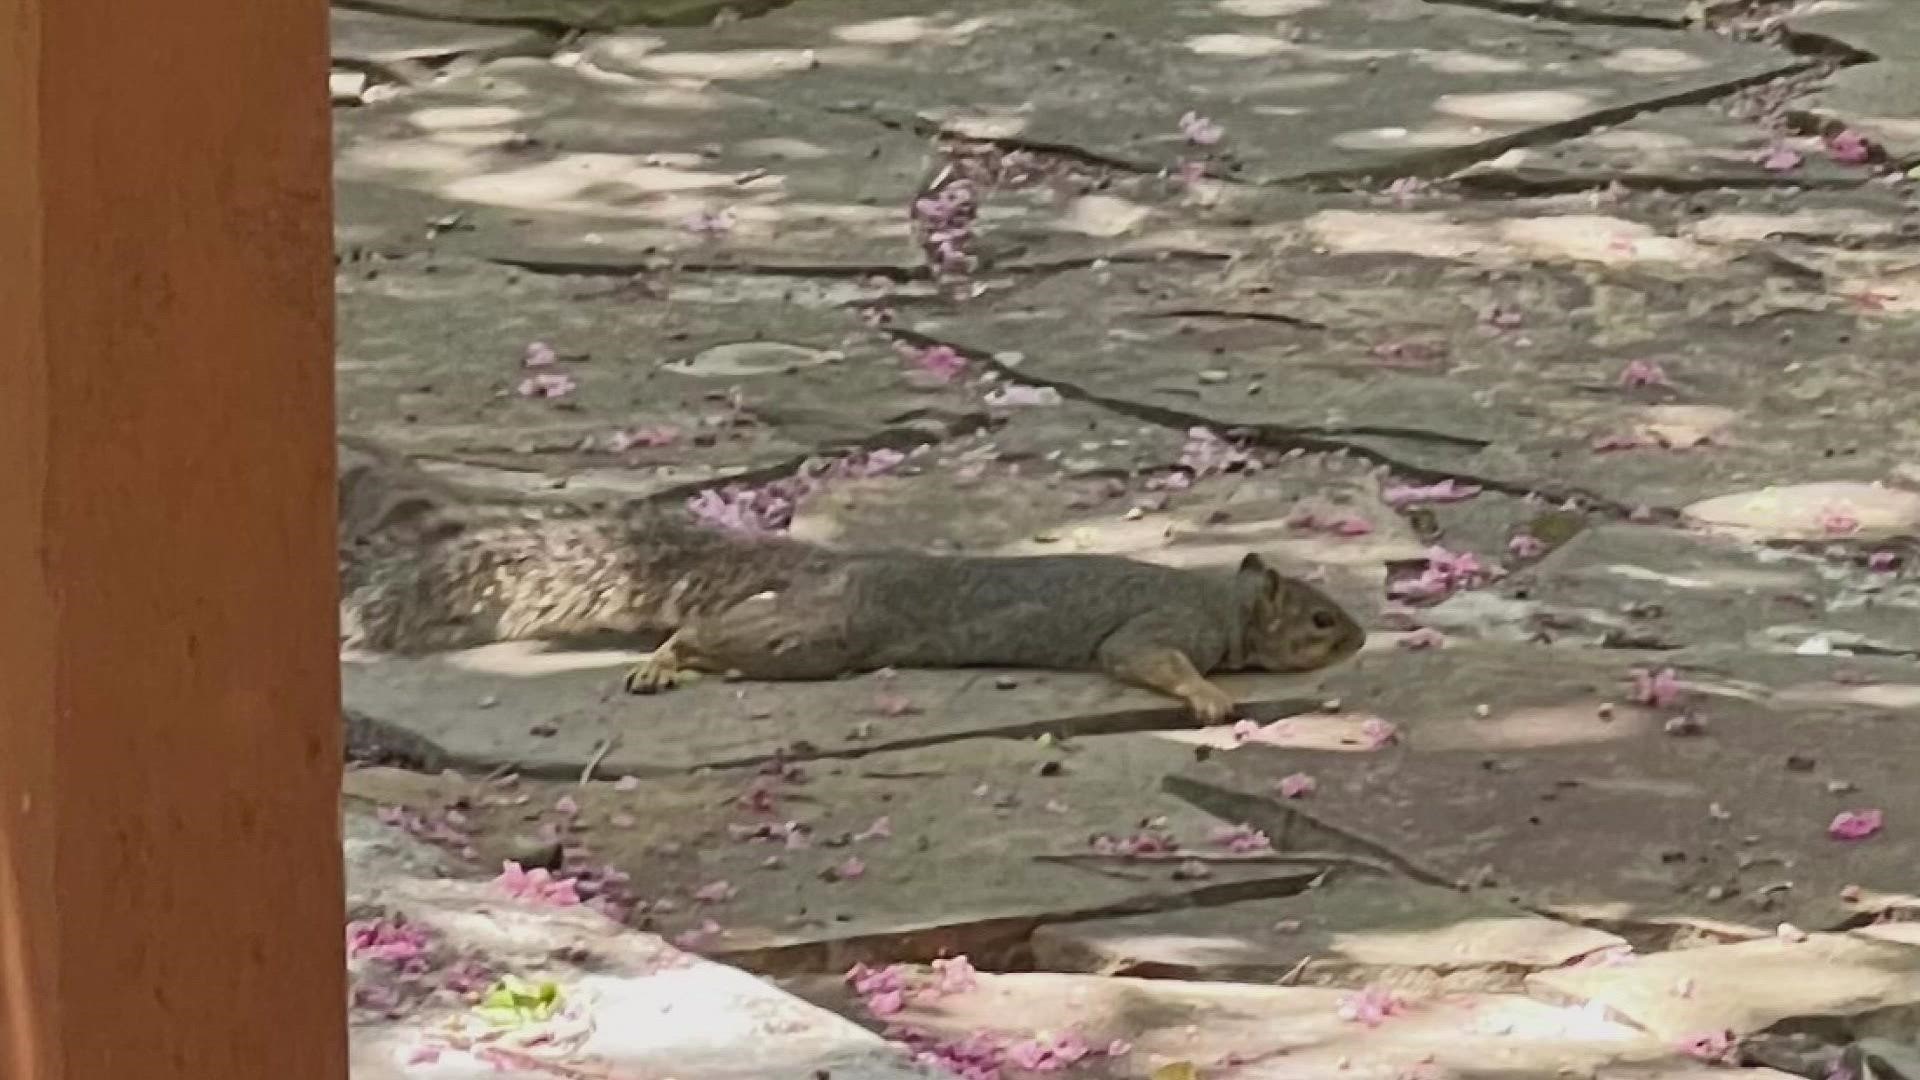 Have you heard of "splooting"? Squirrels are doing it to stay cool in this Texas heat.